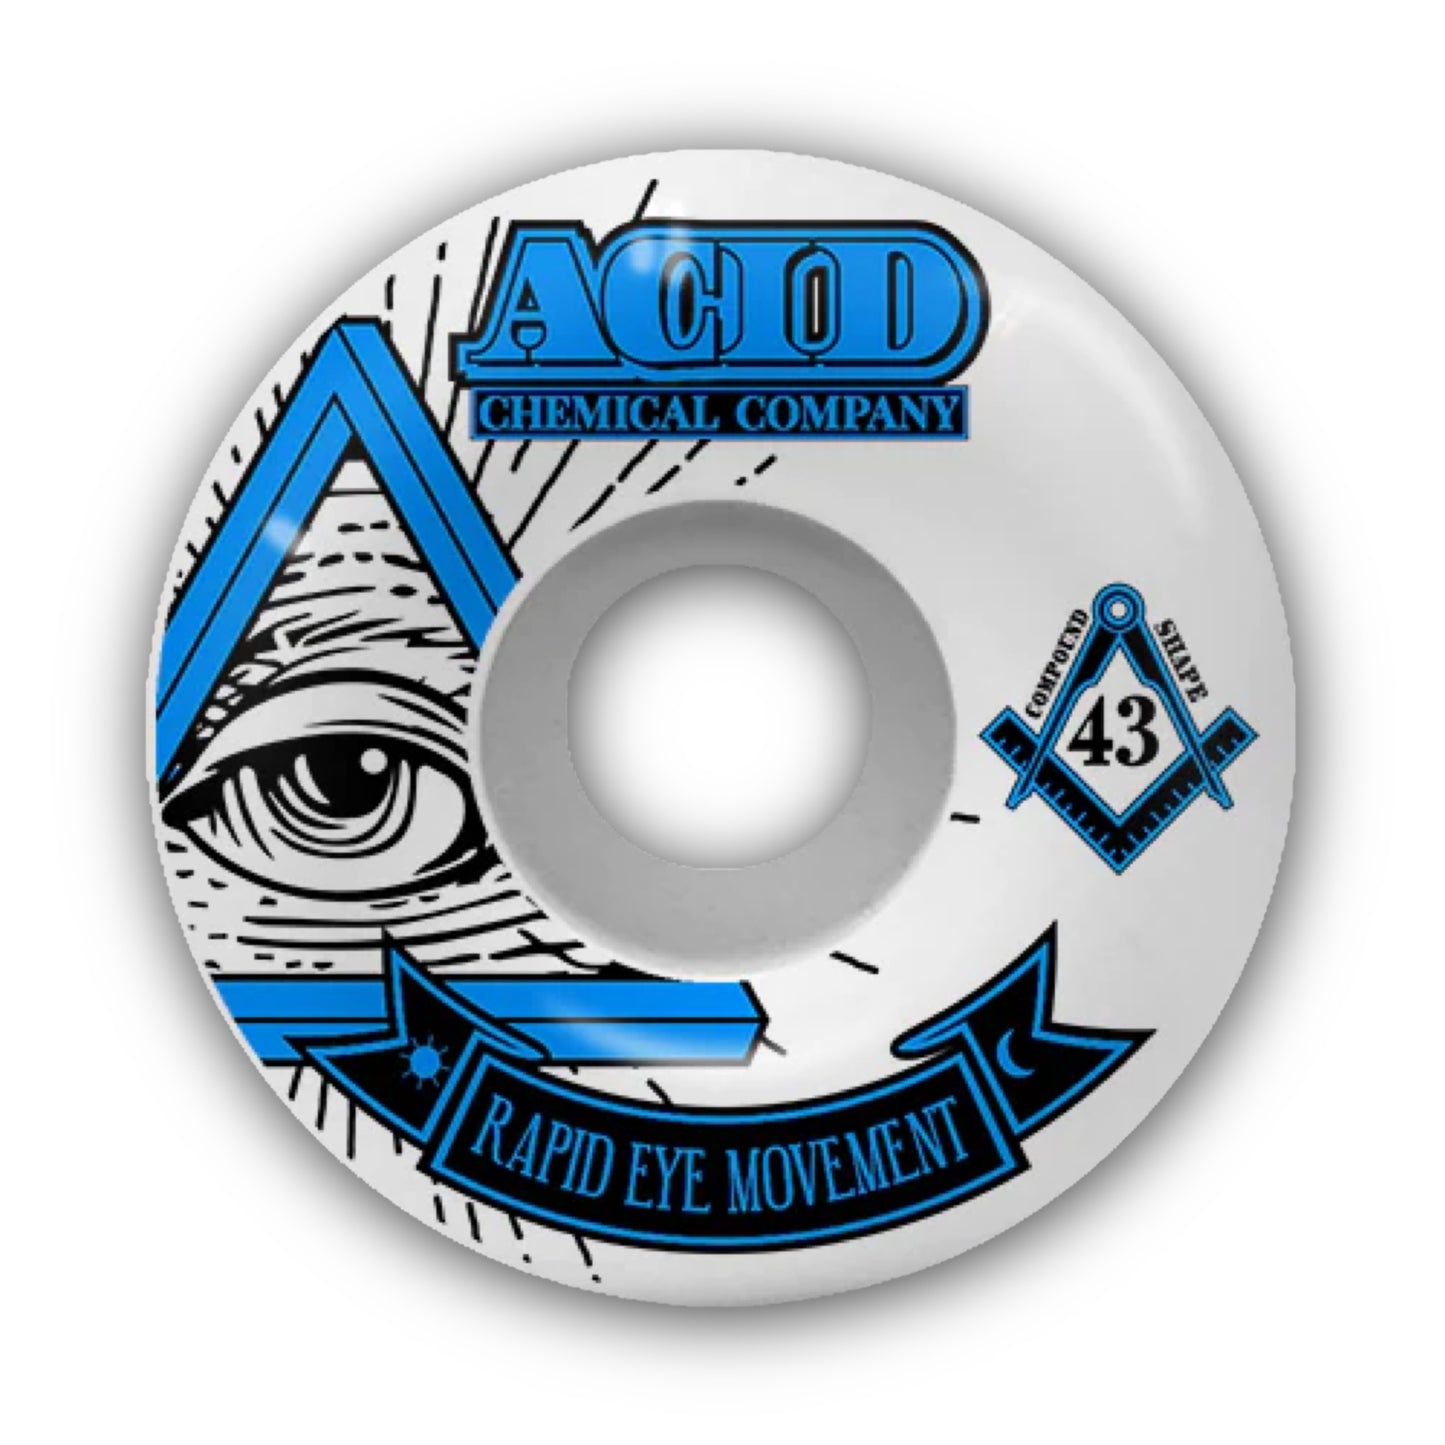 Acid Chemical Co. Pyramid REM Formula Skateboard Wheels; White skateboard wheels with a blue side print; Side print graphic features an eyeball inside a triangle and the text Rapid Eye Movement; Blue lettering also spells out “Acid Chemical Company”